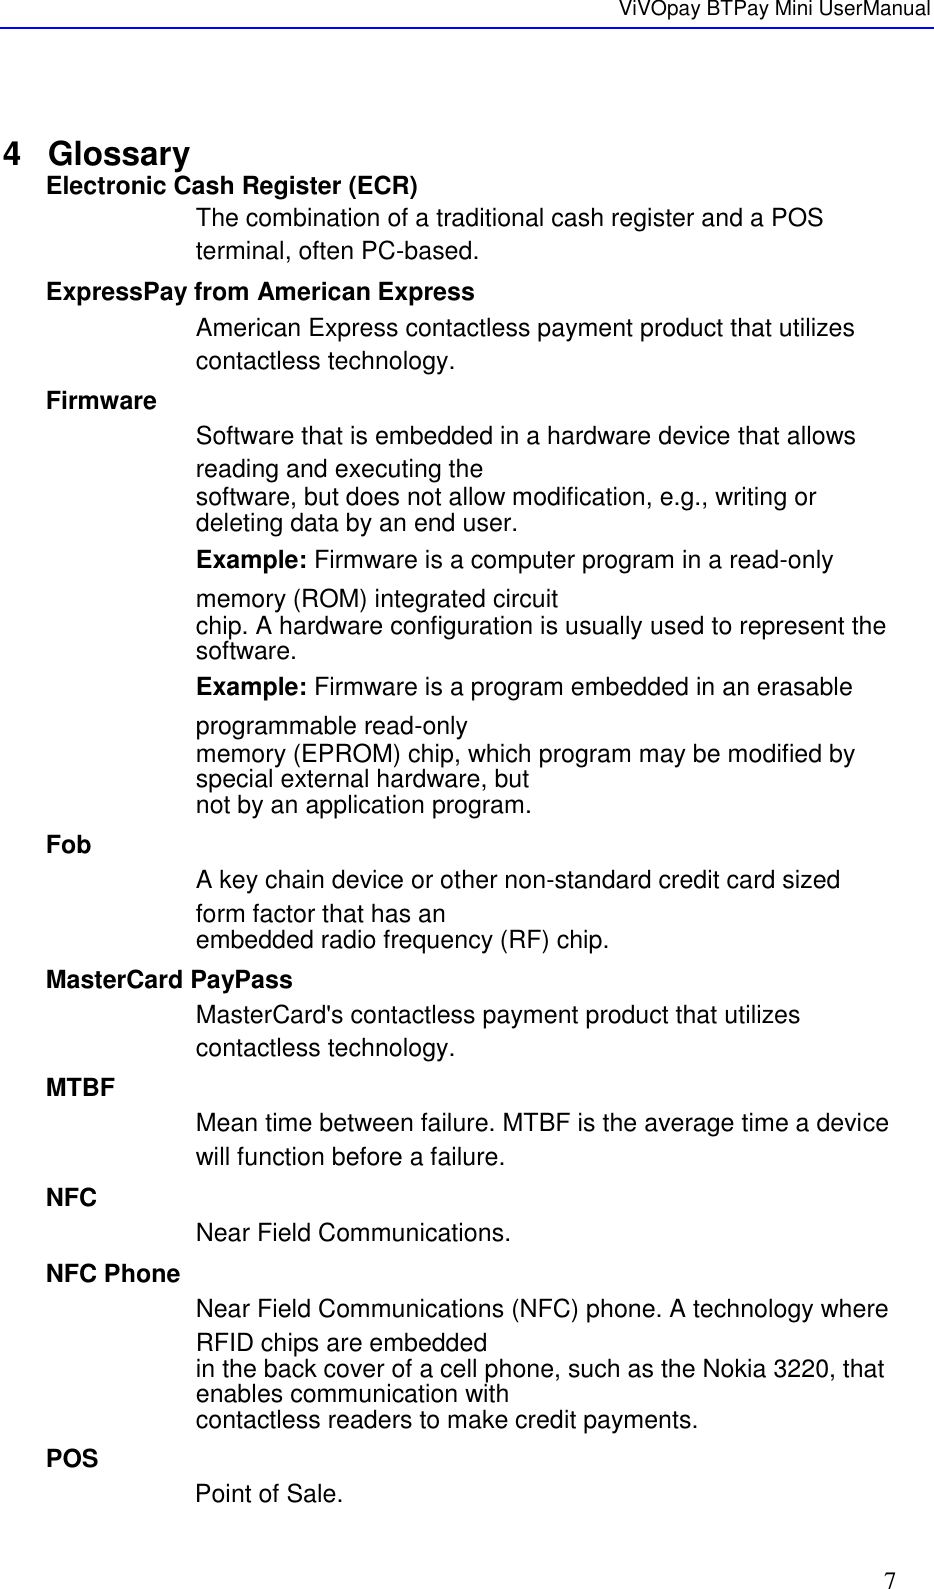   ViVOpay BTPay Mini UserManual     7  4  Glossary Electronic Cash Register (ECR) The combination of a traditional cash register and a POS terminal, often PC-based. ExpressPay from American Express American Express contactless payment product that utilizes contactless technology. Firmware Software that is embedded in a hardware device that allows reading and executing the software, but does not allow modification, e.g., writing or deleting data by an end user. Example: Firmware is a computer program in a read-only memory (ROM) integrated circuit chip. A hardware configuration is usually used to represent the software. Example: Firmware is a program embedded in an erasable programmable read-only memory (EPROM) chip, which program may be modified by special external hardware, but not by an application program.  Fob A key chain device or other non-standard credit card sized form factor that has an embedded radio frequency (RF) chip. MasterCard PayPass MasterCard&apos;s contactless payment product that utilizes contactless technology. MTBF Mean time between failure. MTBF is the average time a device will function before a failure. NFC Near Field Communications. NFC Phone Near Field Communications (NFC) phone. A technology where RFID chips are embedded in the back cover of a cell phone, such as the Nokia 3220, that enables communication with contactless readers to make credit payments. POS Point of Sale. 